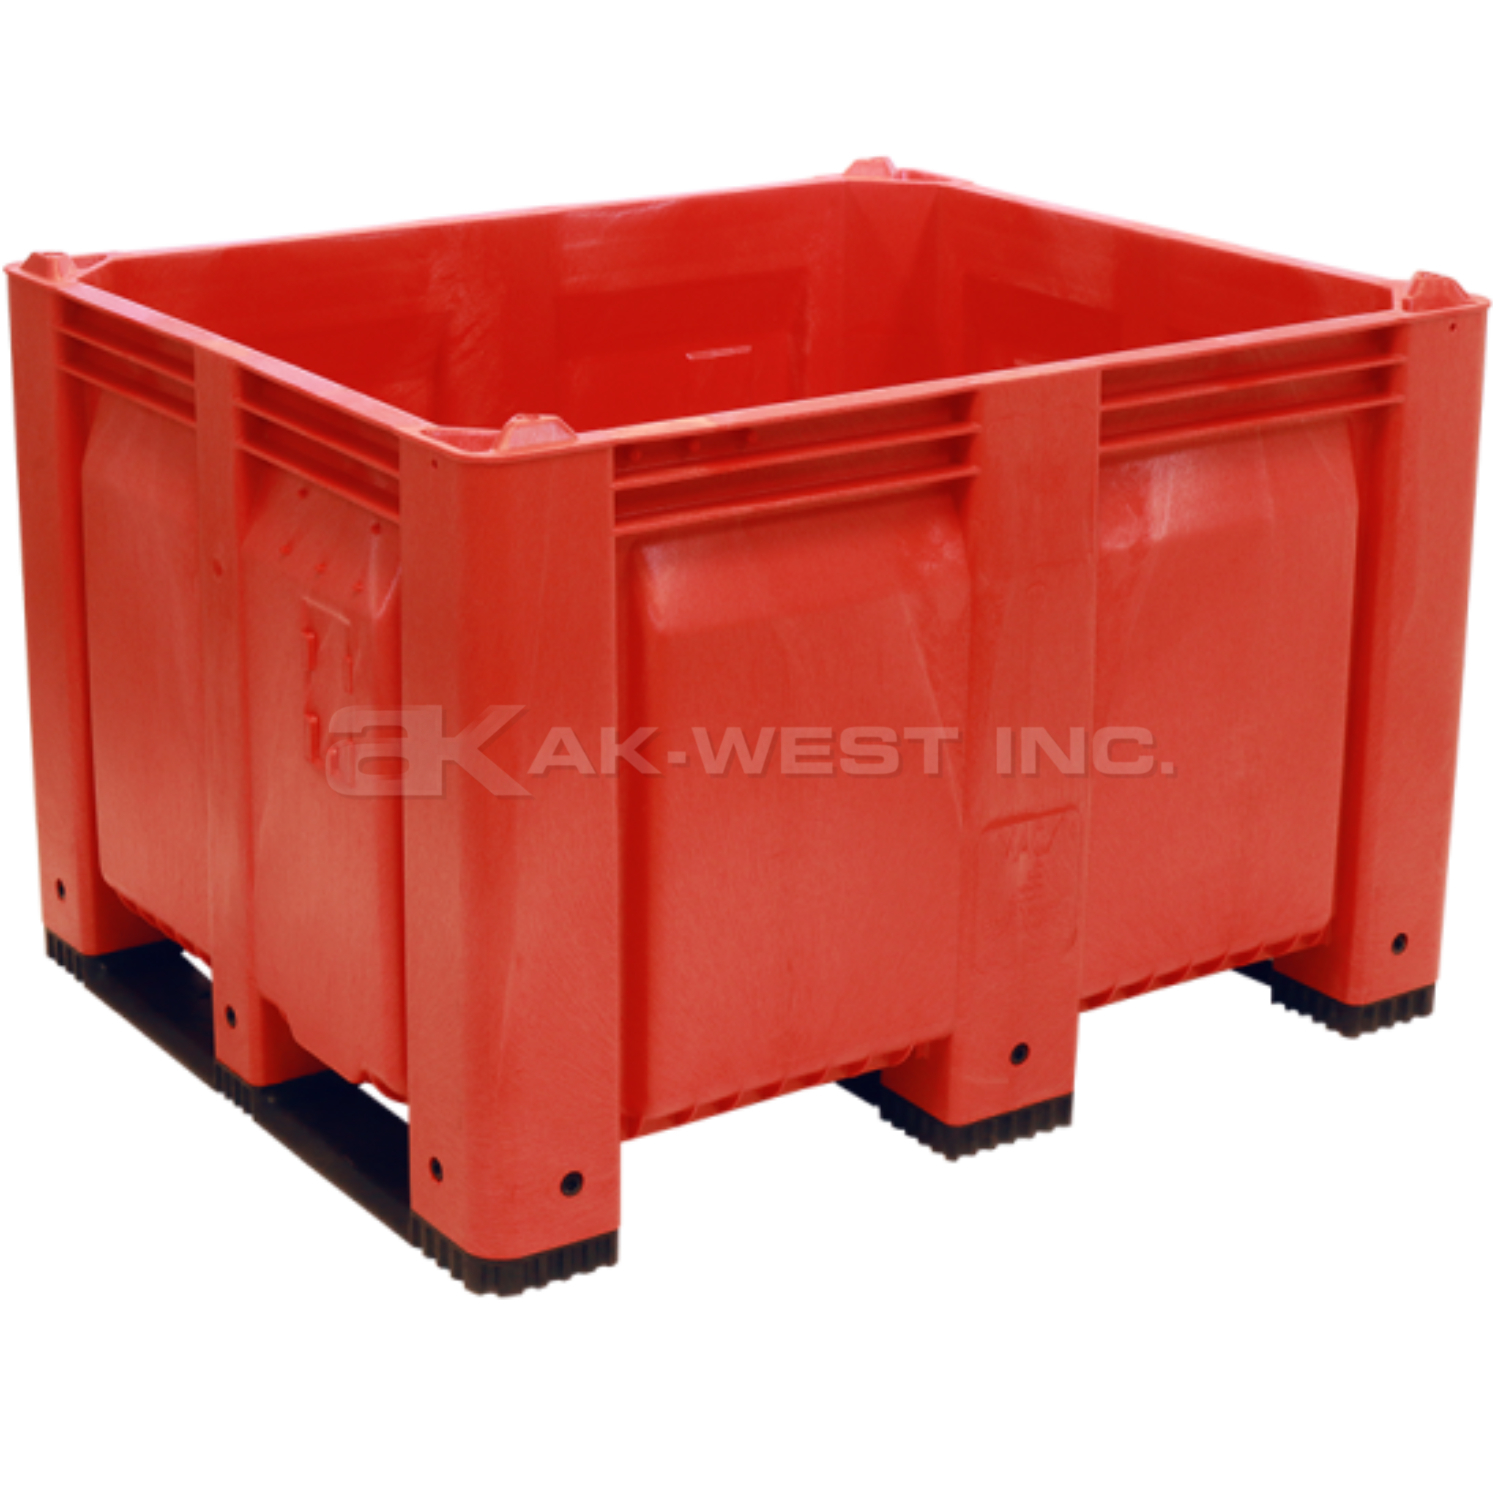 Red, 48"L x 40"W x 31"H Bulk Container w/ Solid Sides, Short Side Runners